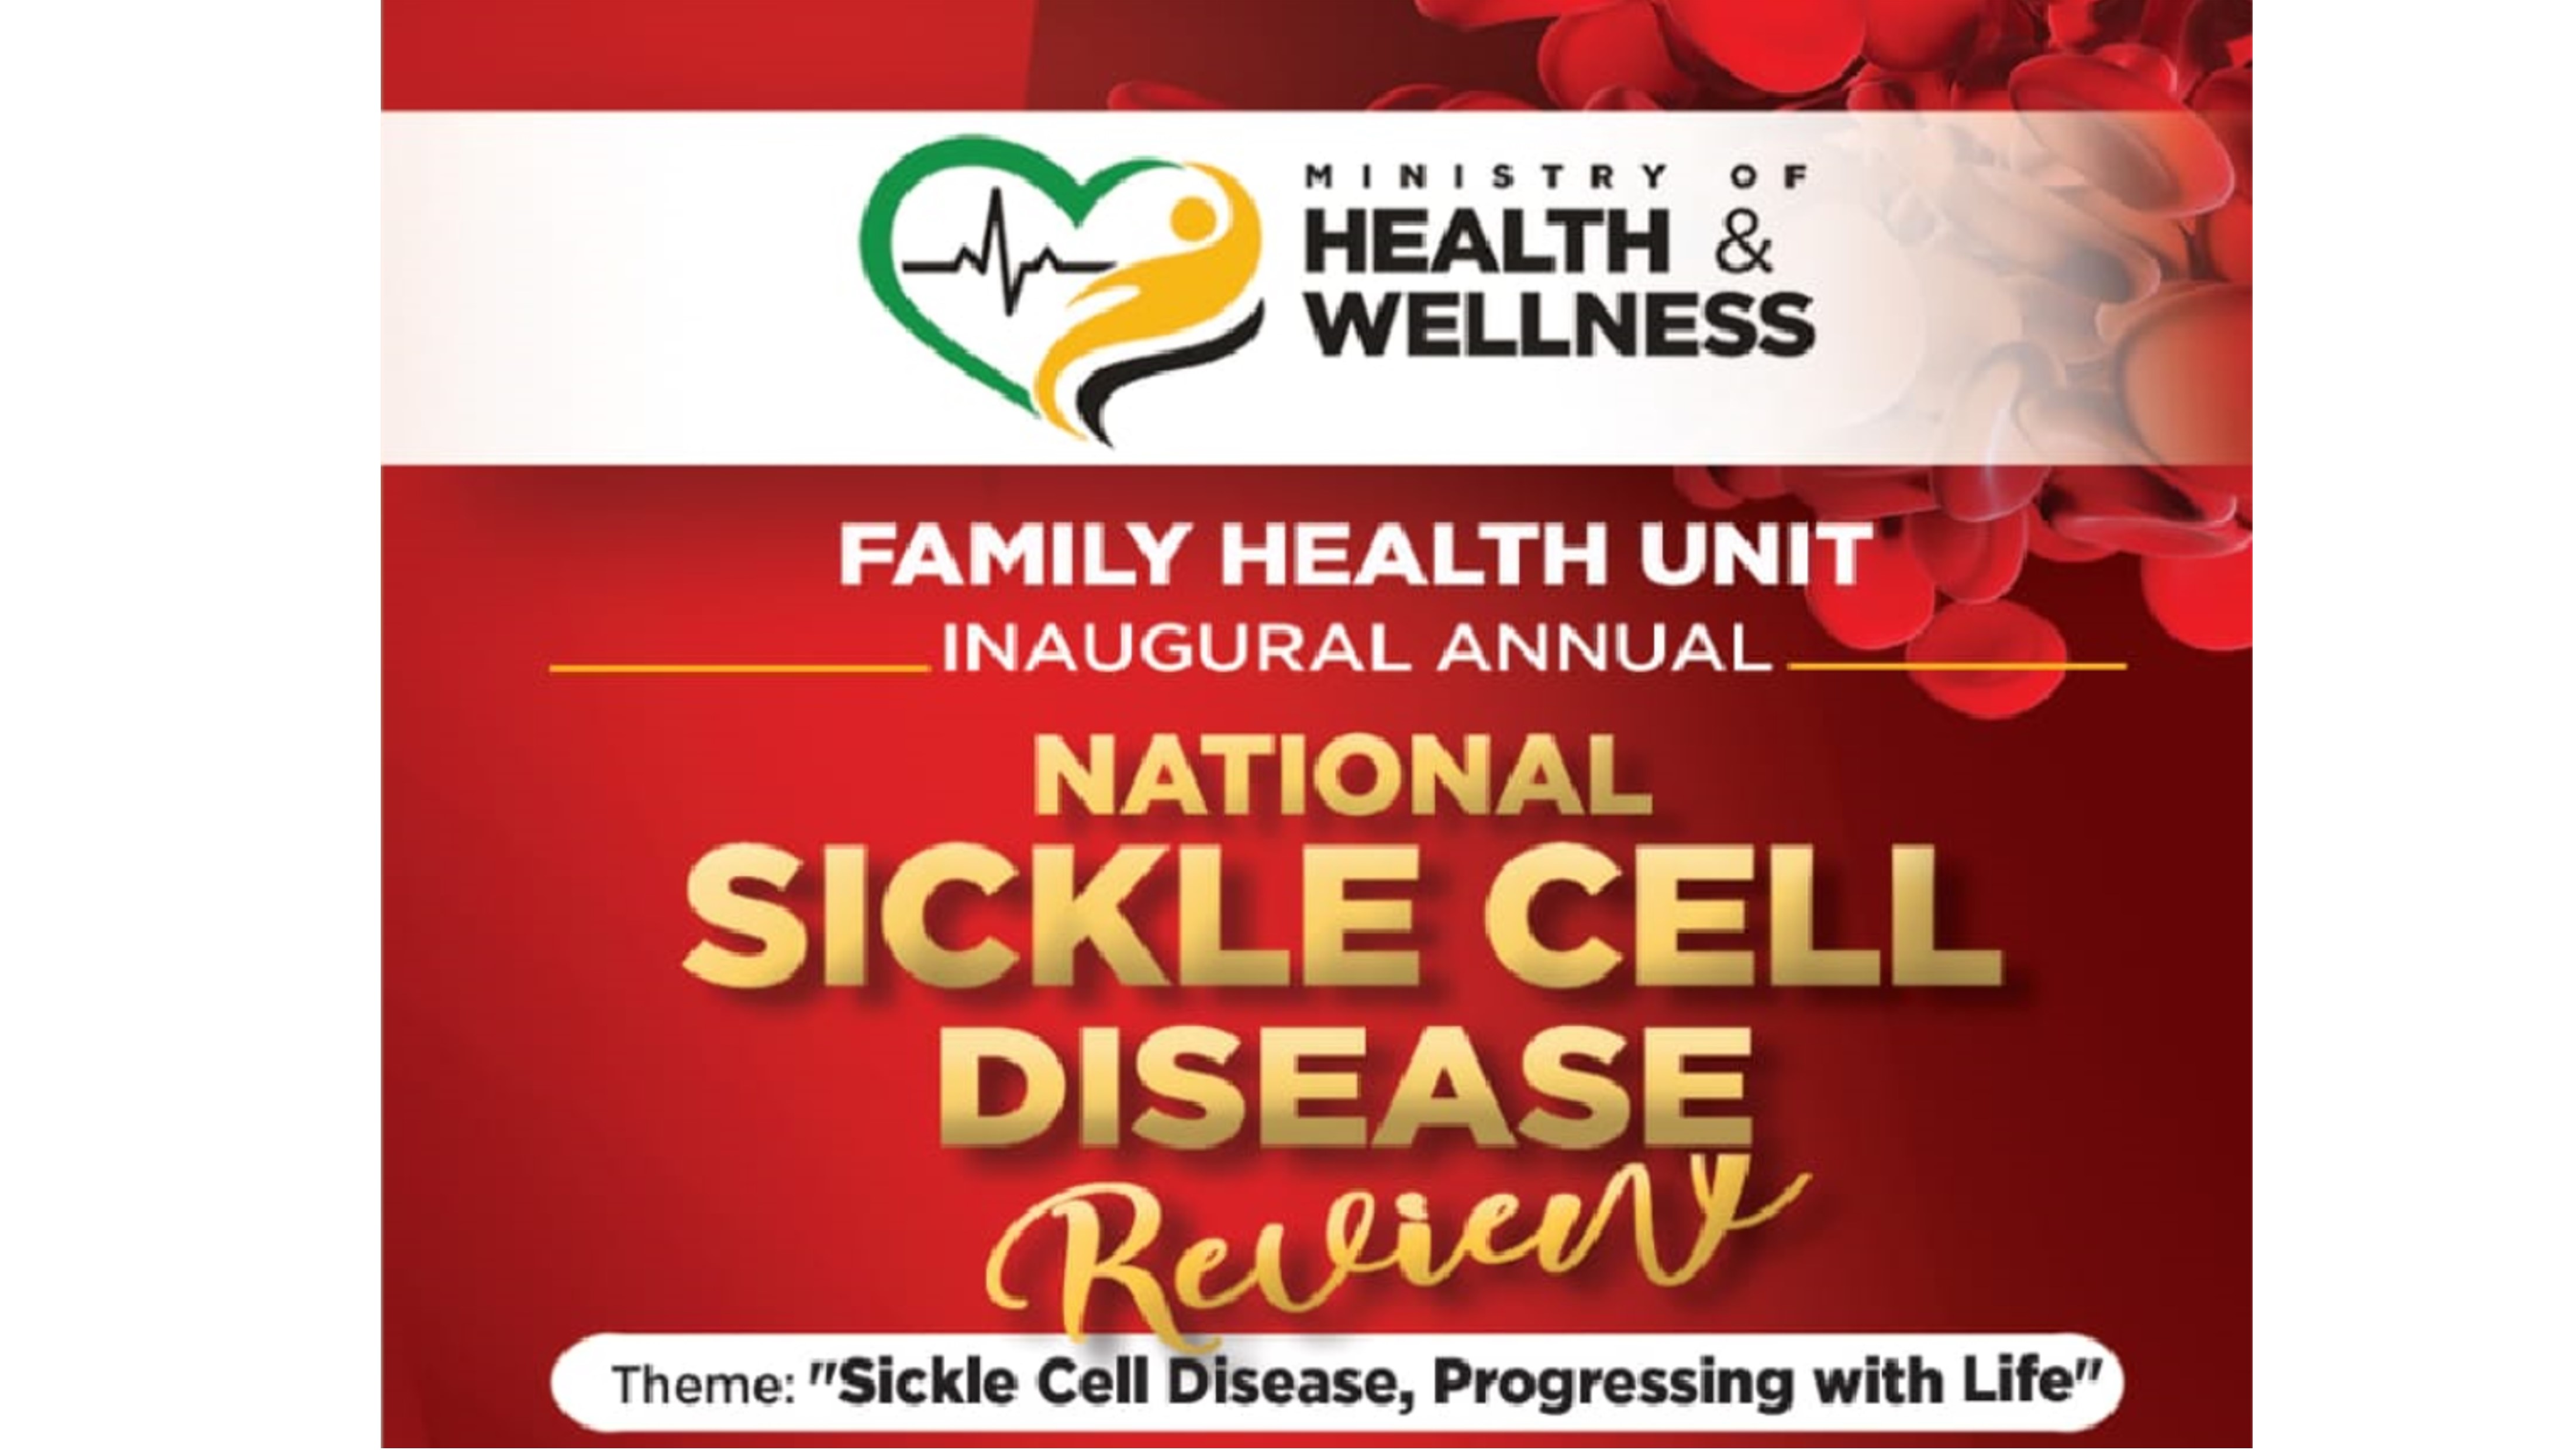 Annual Jamaican Sickle Cell Disease Review